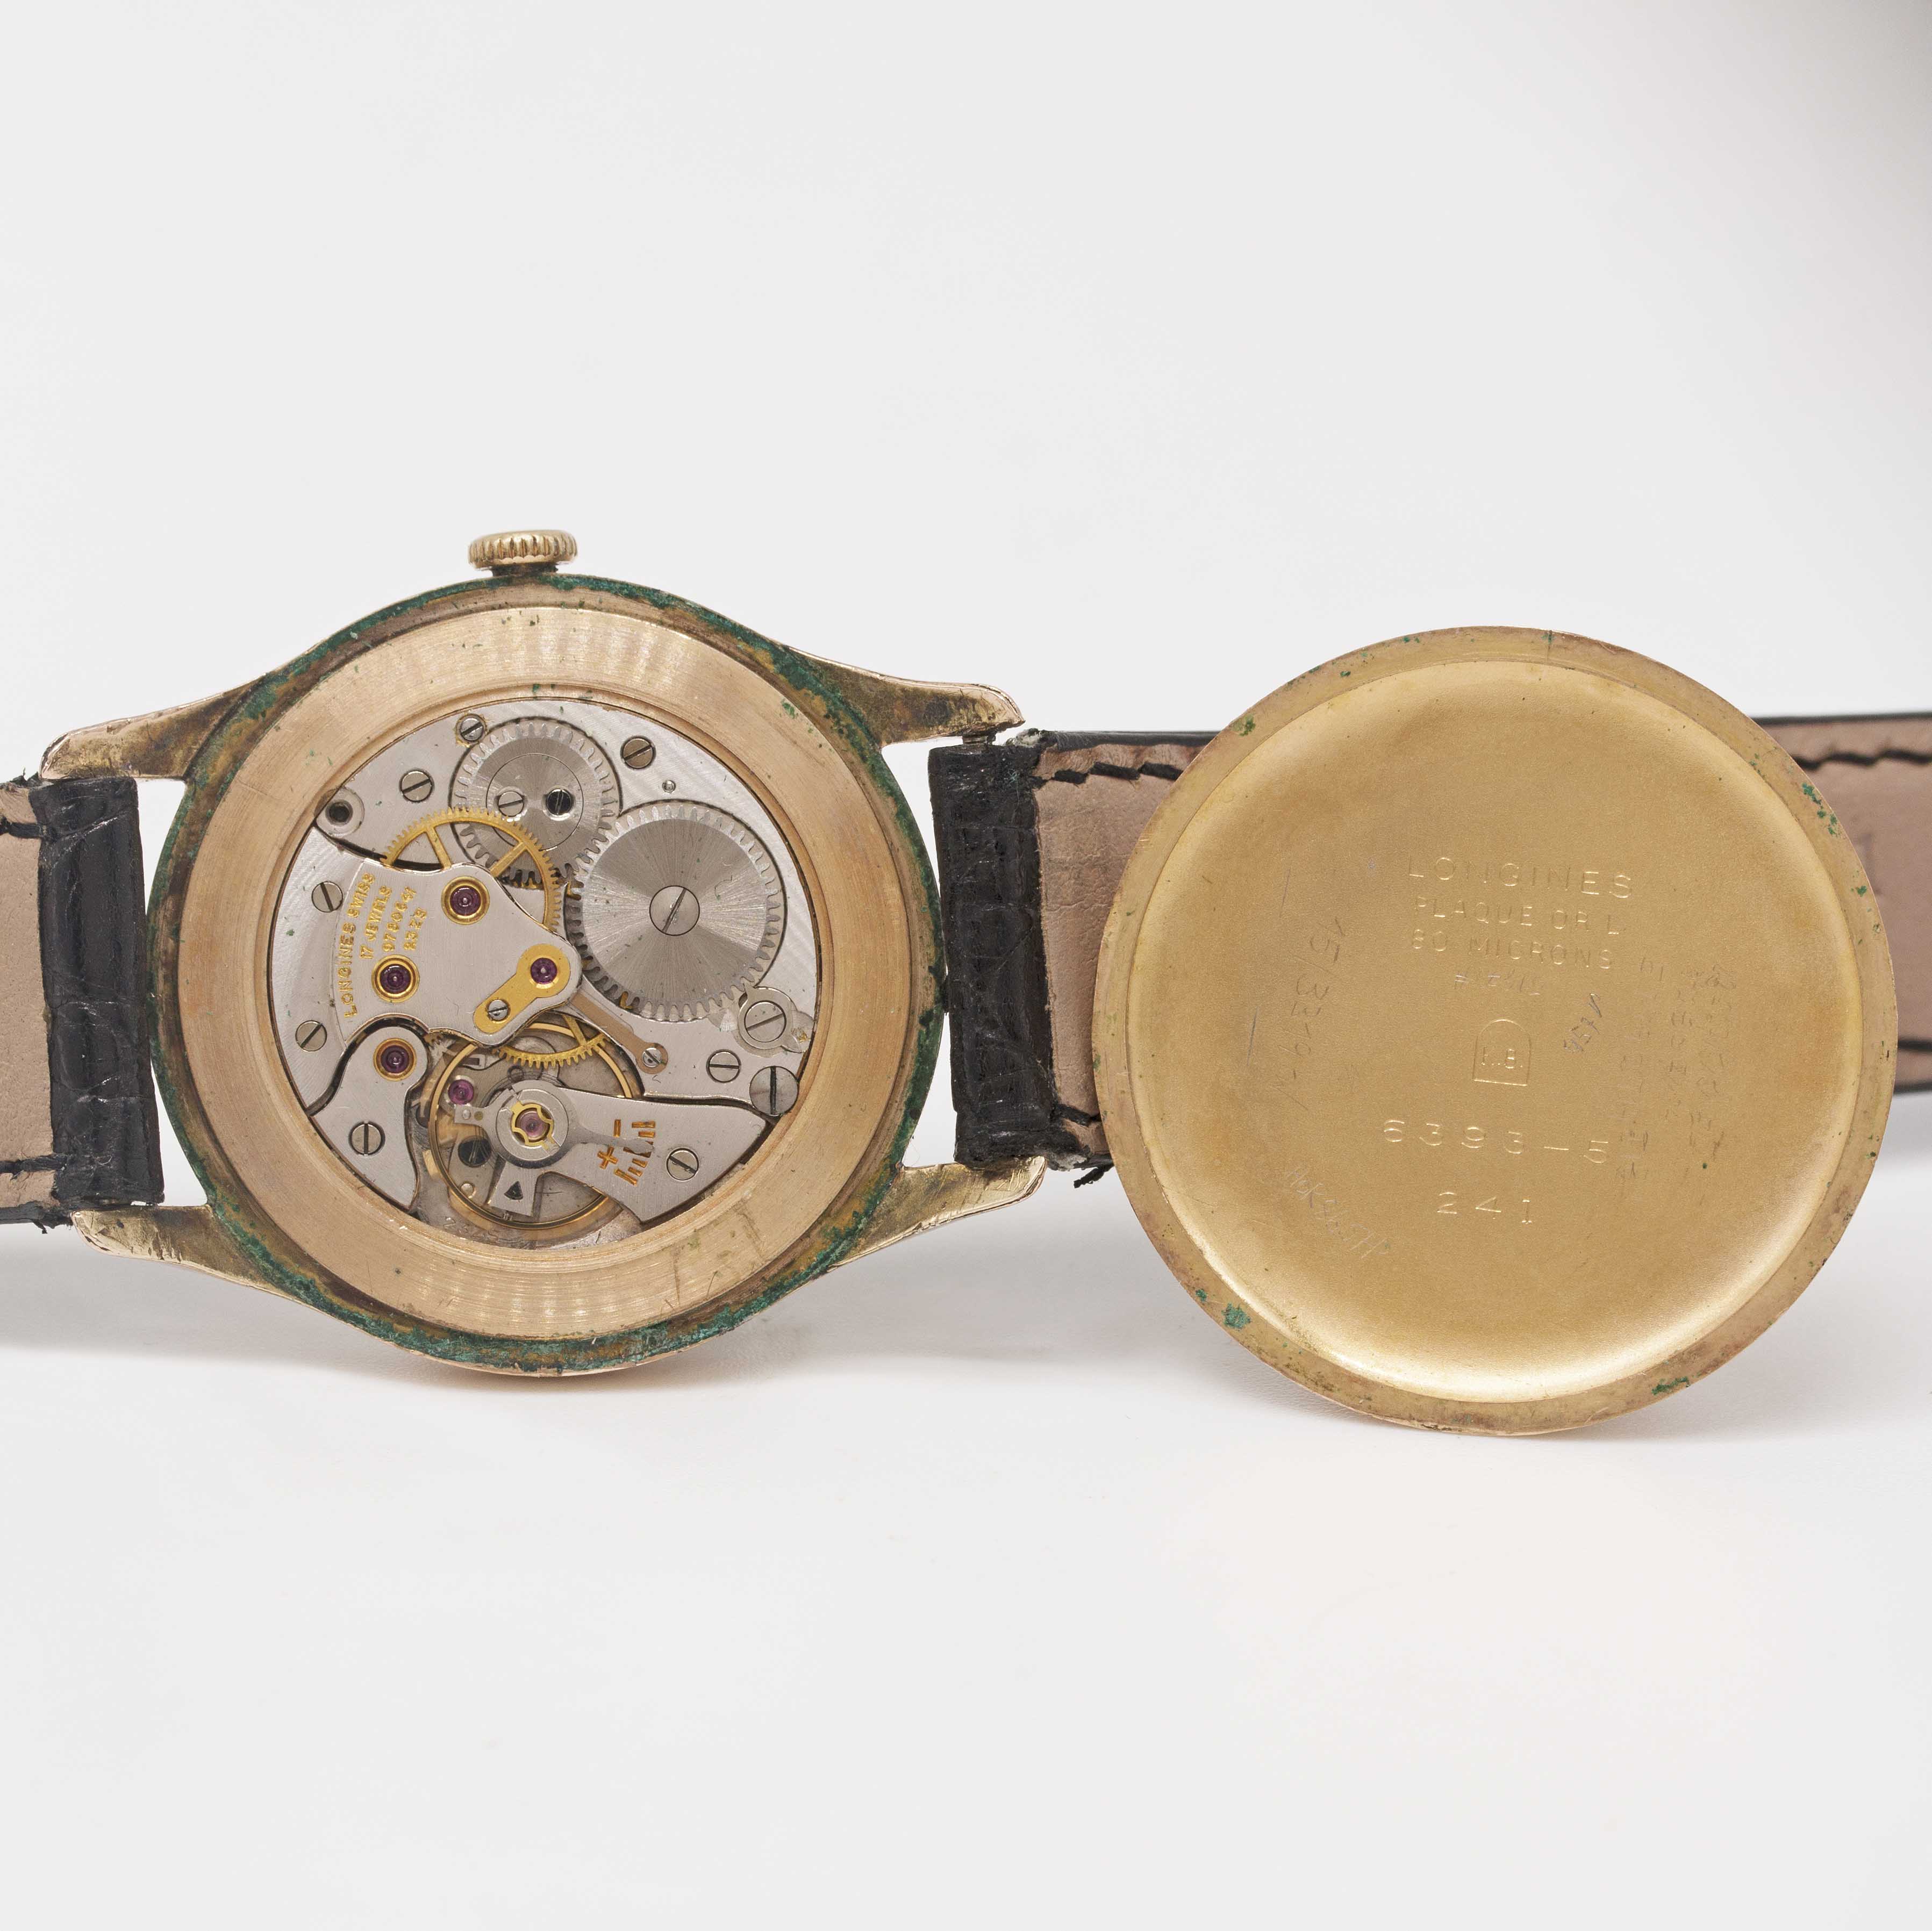 A GENTLEMAN'S PINK GOLD PLATED LONGINES WRIST WATCH CIRCA 1955, REF. 6393-5 TWO TONE SILVER DIAL - Image 6 of 6